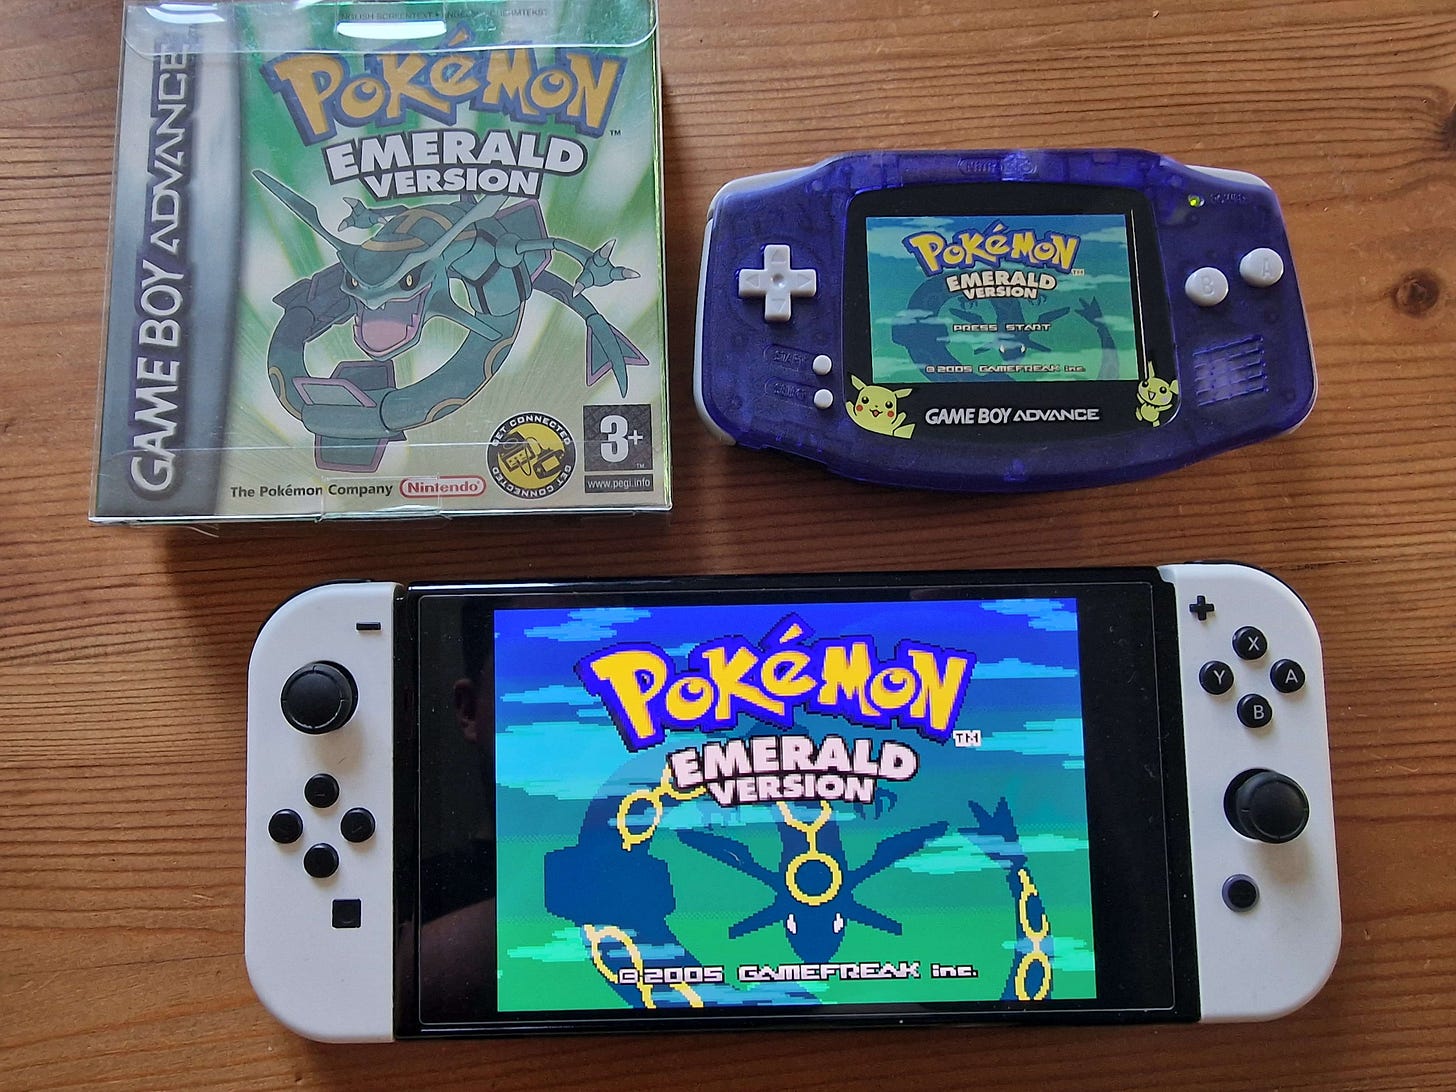 Fangking Omega’s Nintendo Switch OLED, running a copy of Pokémon Emerald, alongside his legitimate copy of Pokémon Emerald on Game Boy Advance. Maybe someday a release on Switch will be possible via official means?